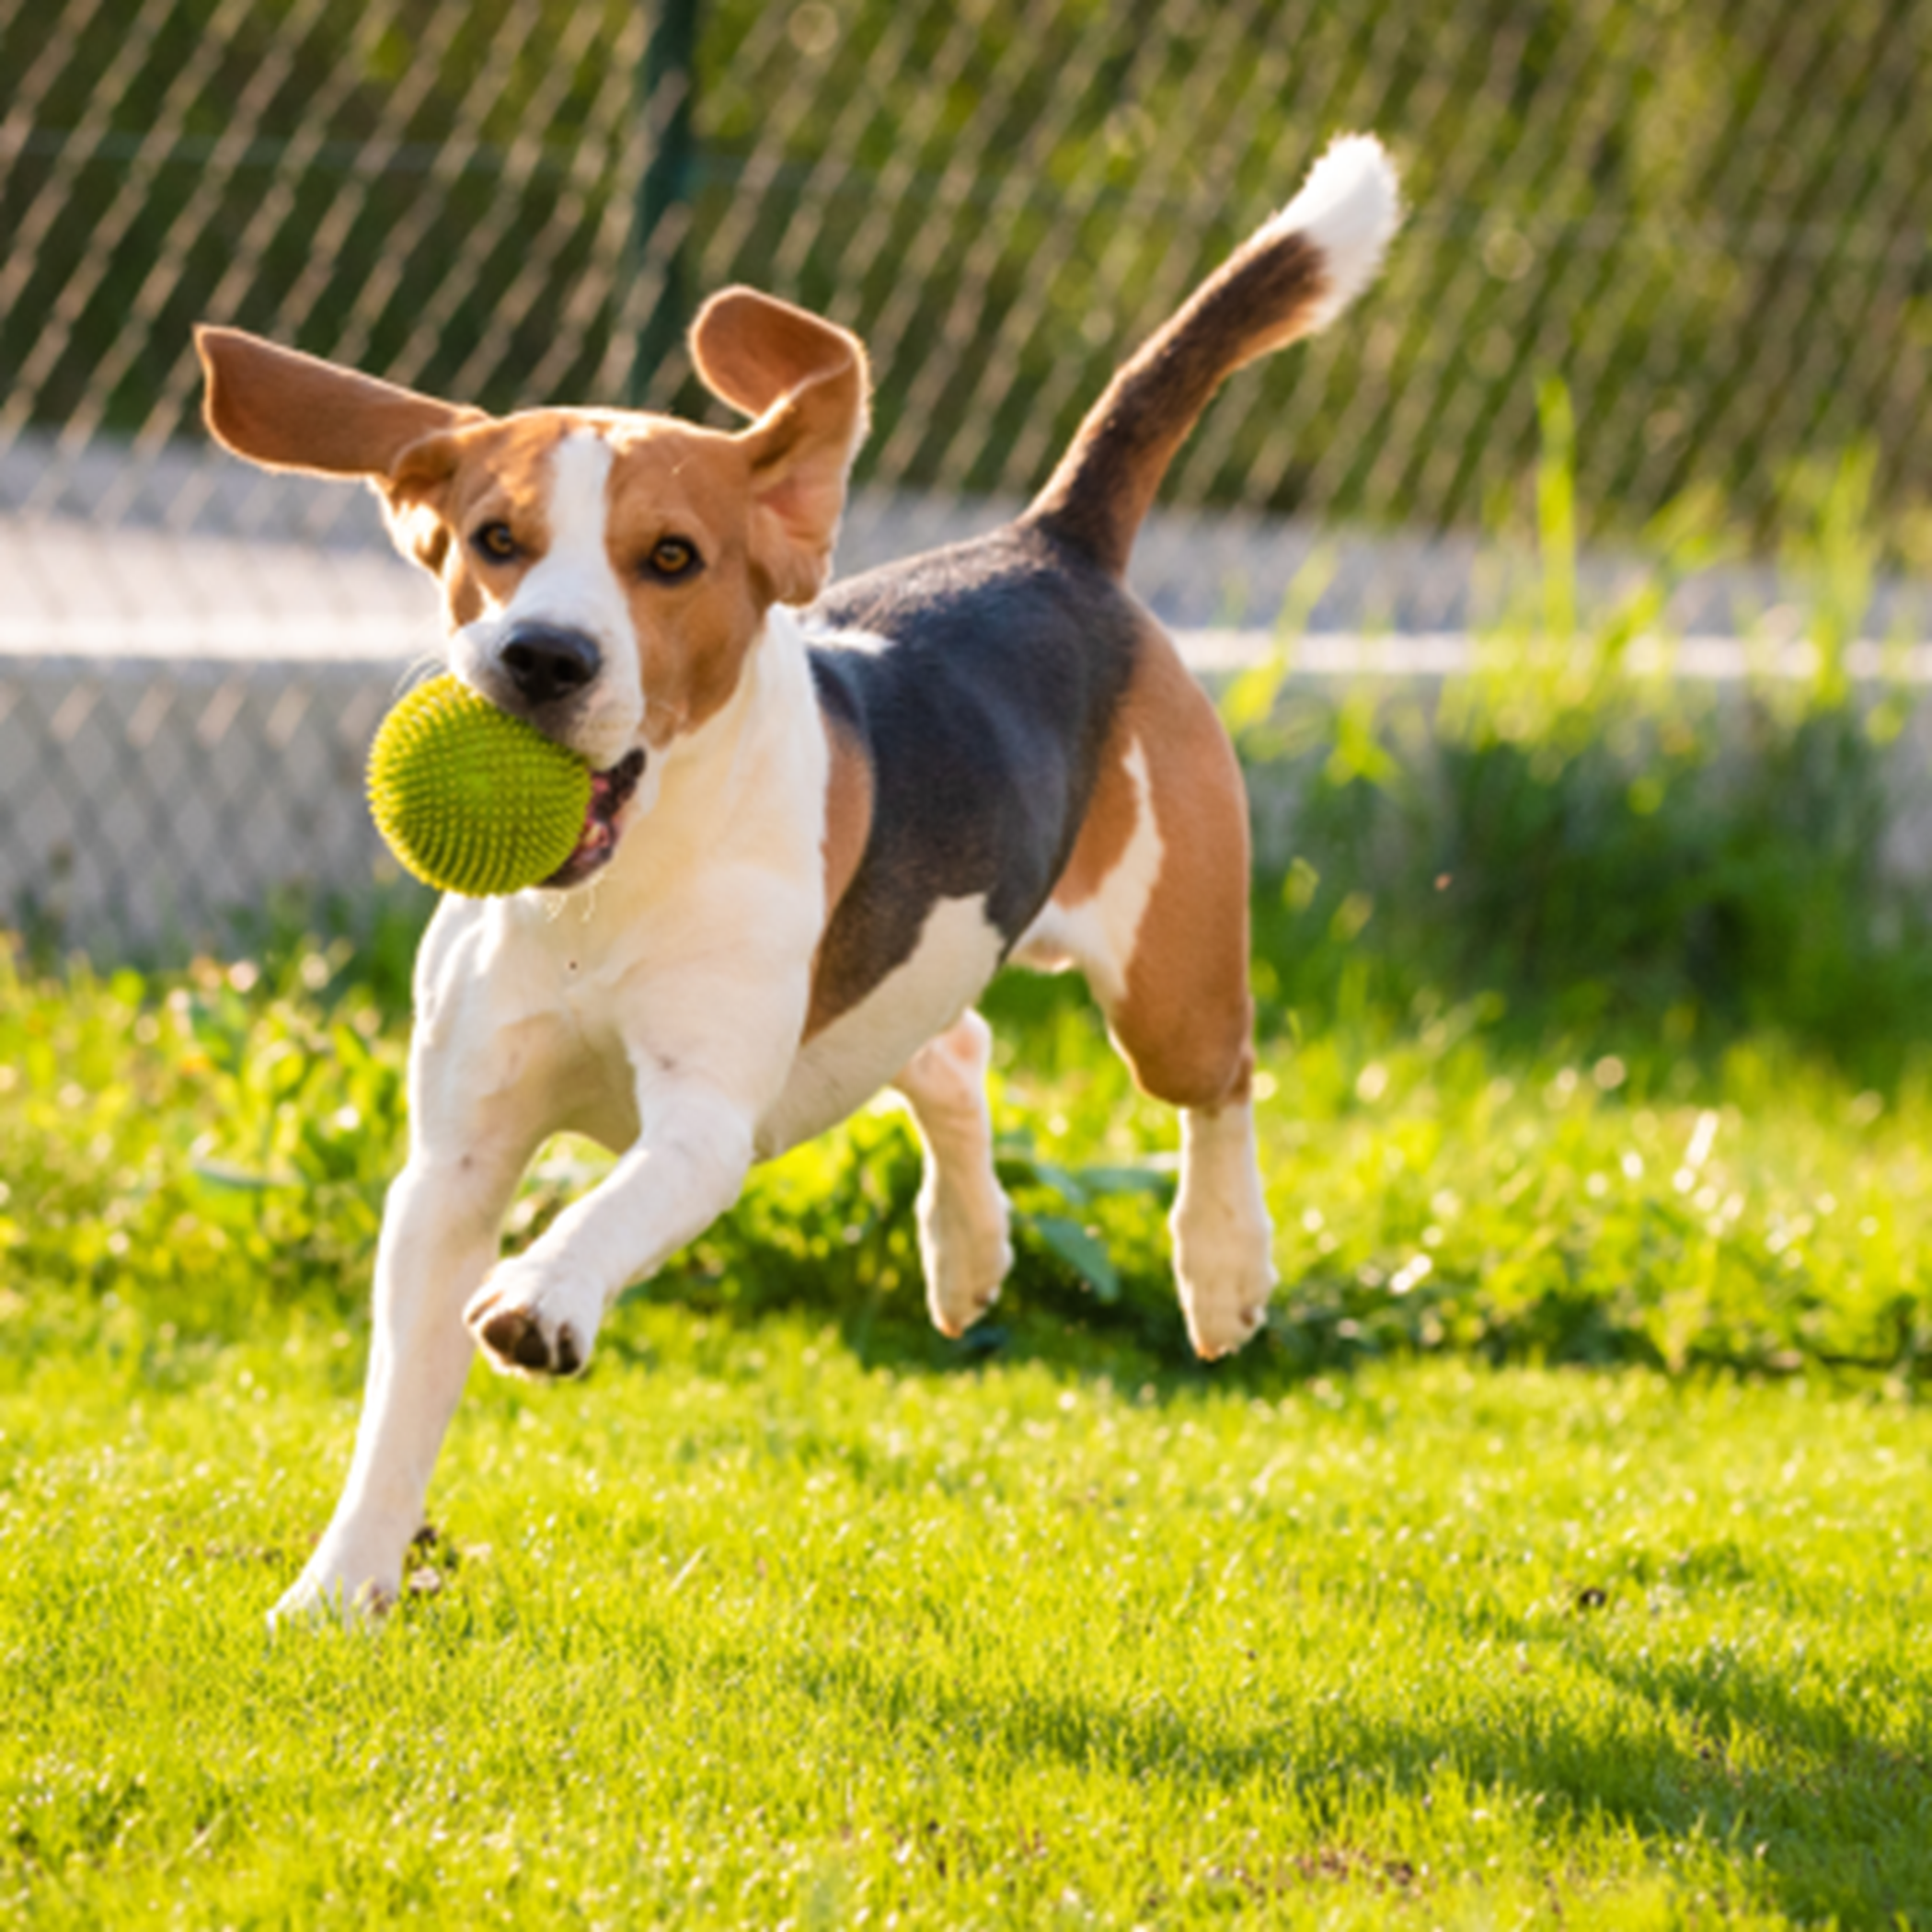 Beagle dog running with a tennis ball on grass lawn